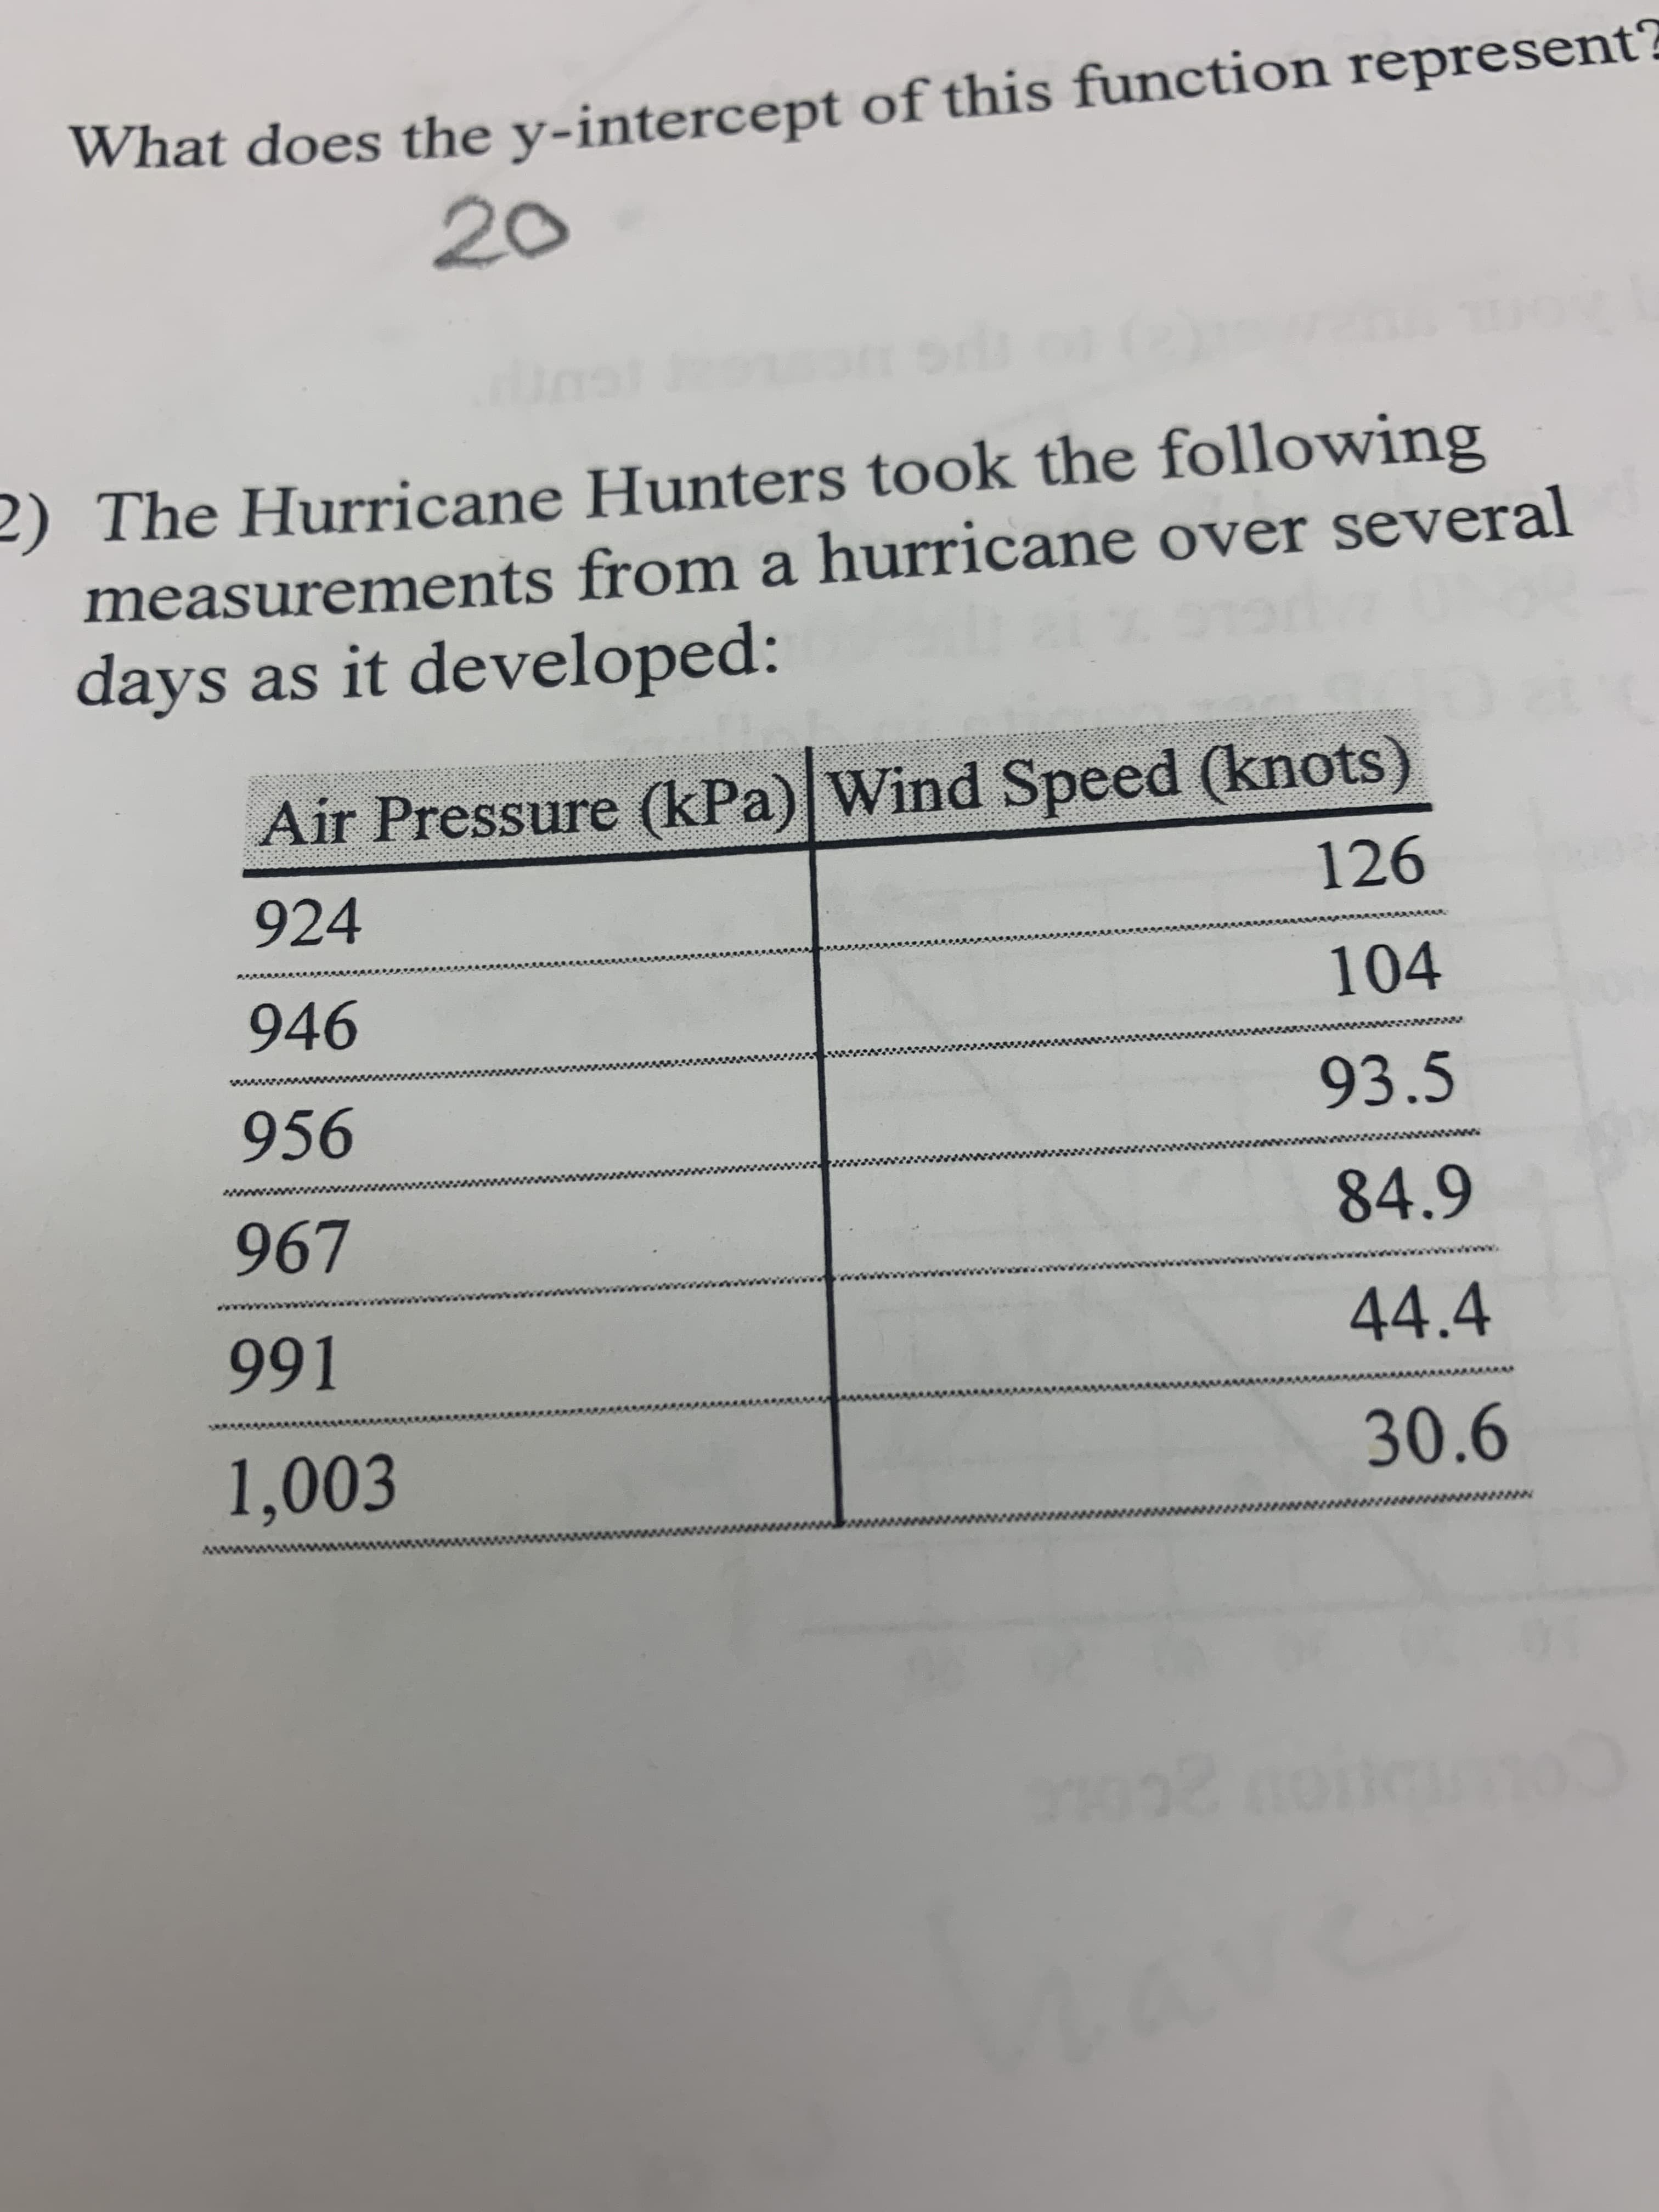 What does the y-intercept of this function represent?
20
2) The Hurricane Hunters took the following
measurements from a hurricane over several
days as it developed:
Air Pressure (kPa) Wind Speed (knots)
126
924
946
104
956
93.5
84.9
44.4
1,003
30.6
